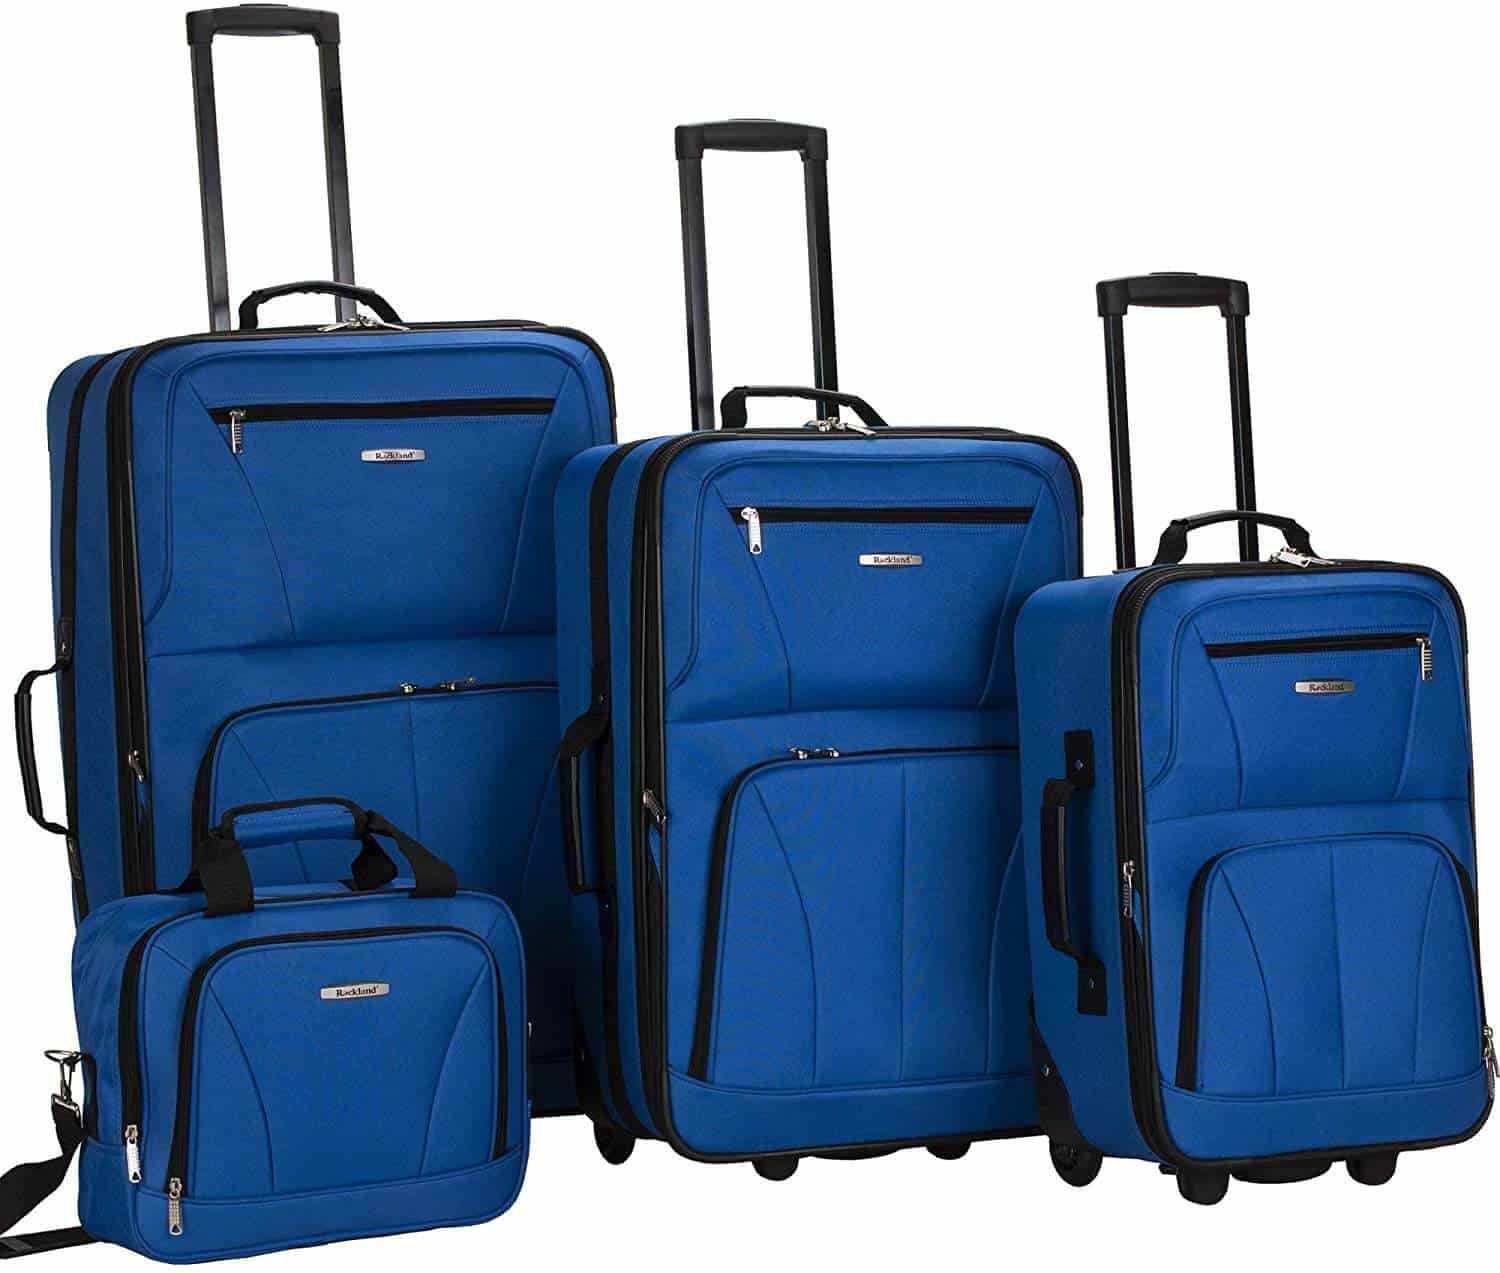 Rockland Luggage 4 Piece Set ONLY $86.90 {Reg $240}